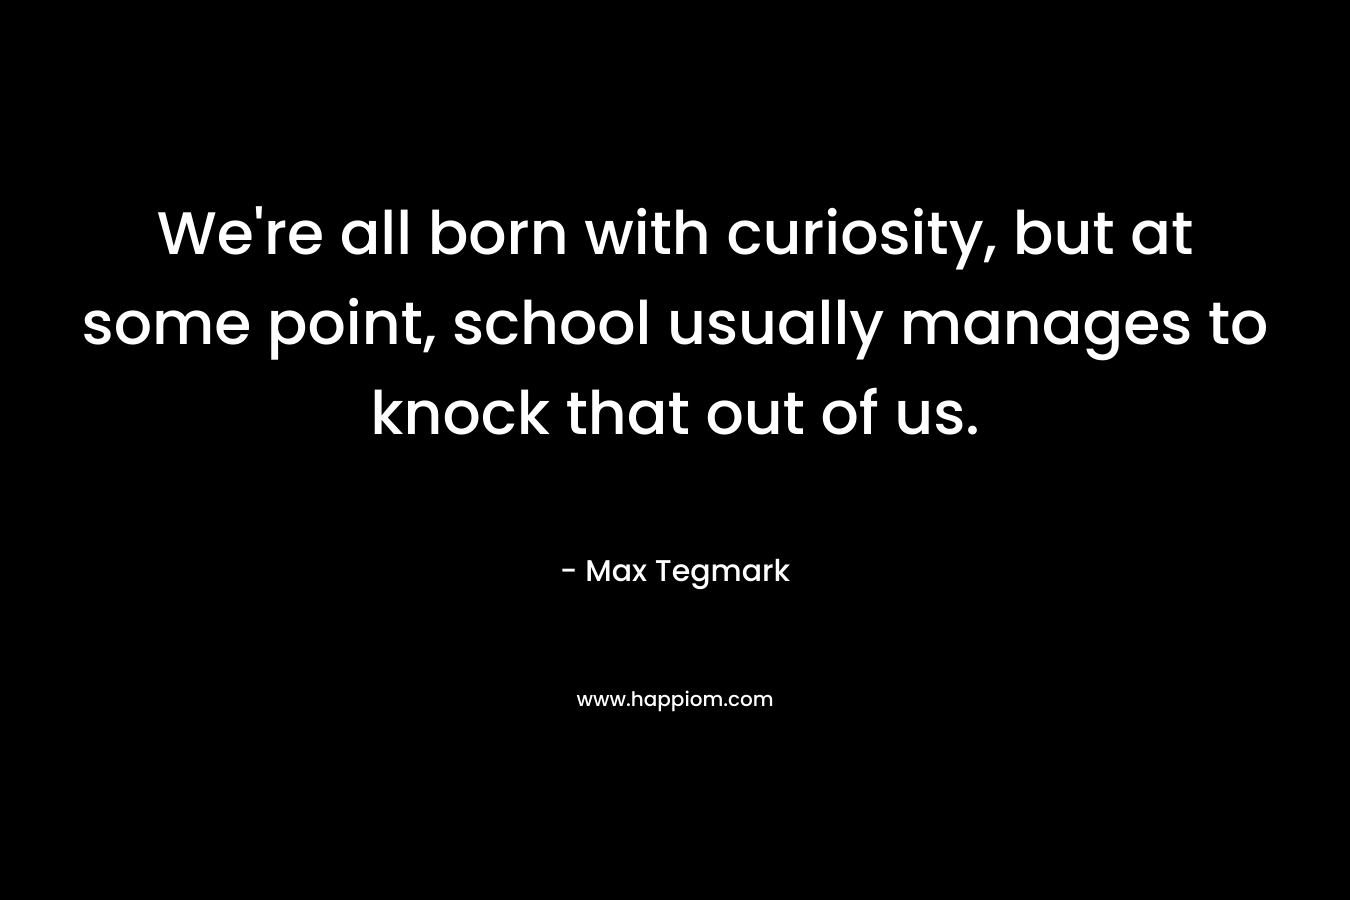 We’re all born with curiosity, but at some point, school usually manages to knock that out of us. – Max Tegmark